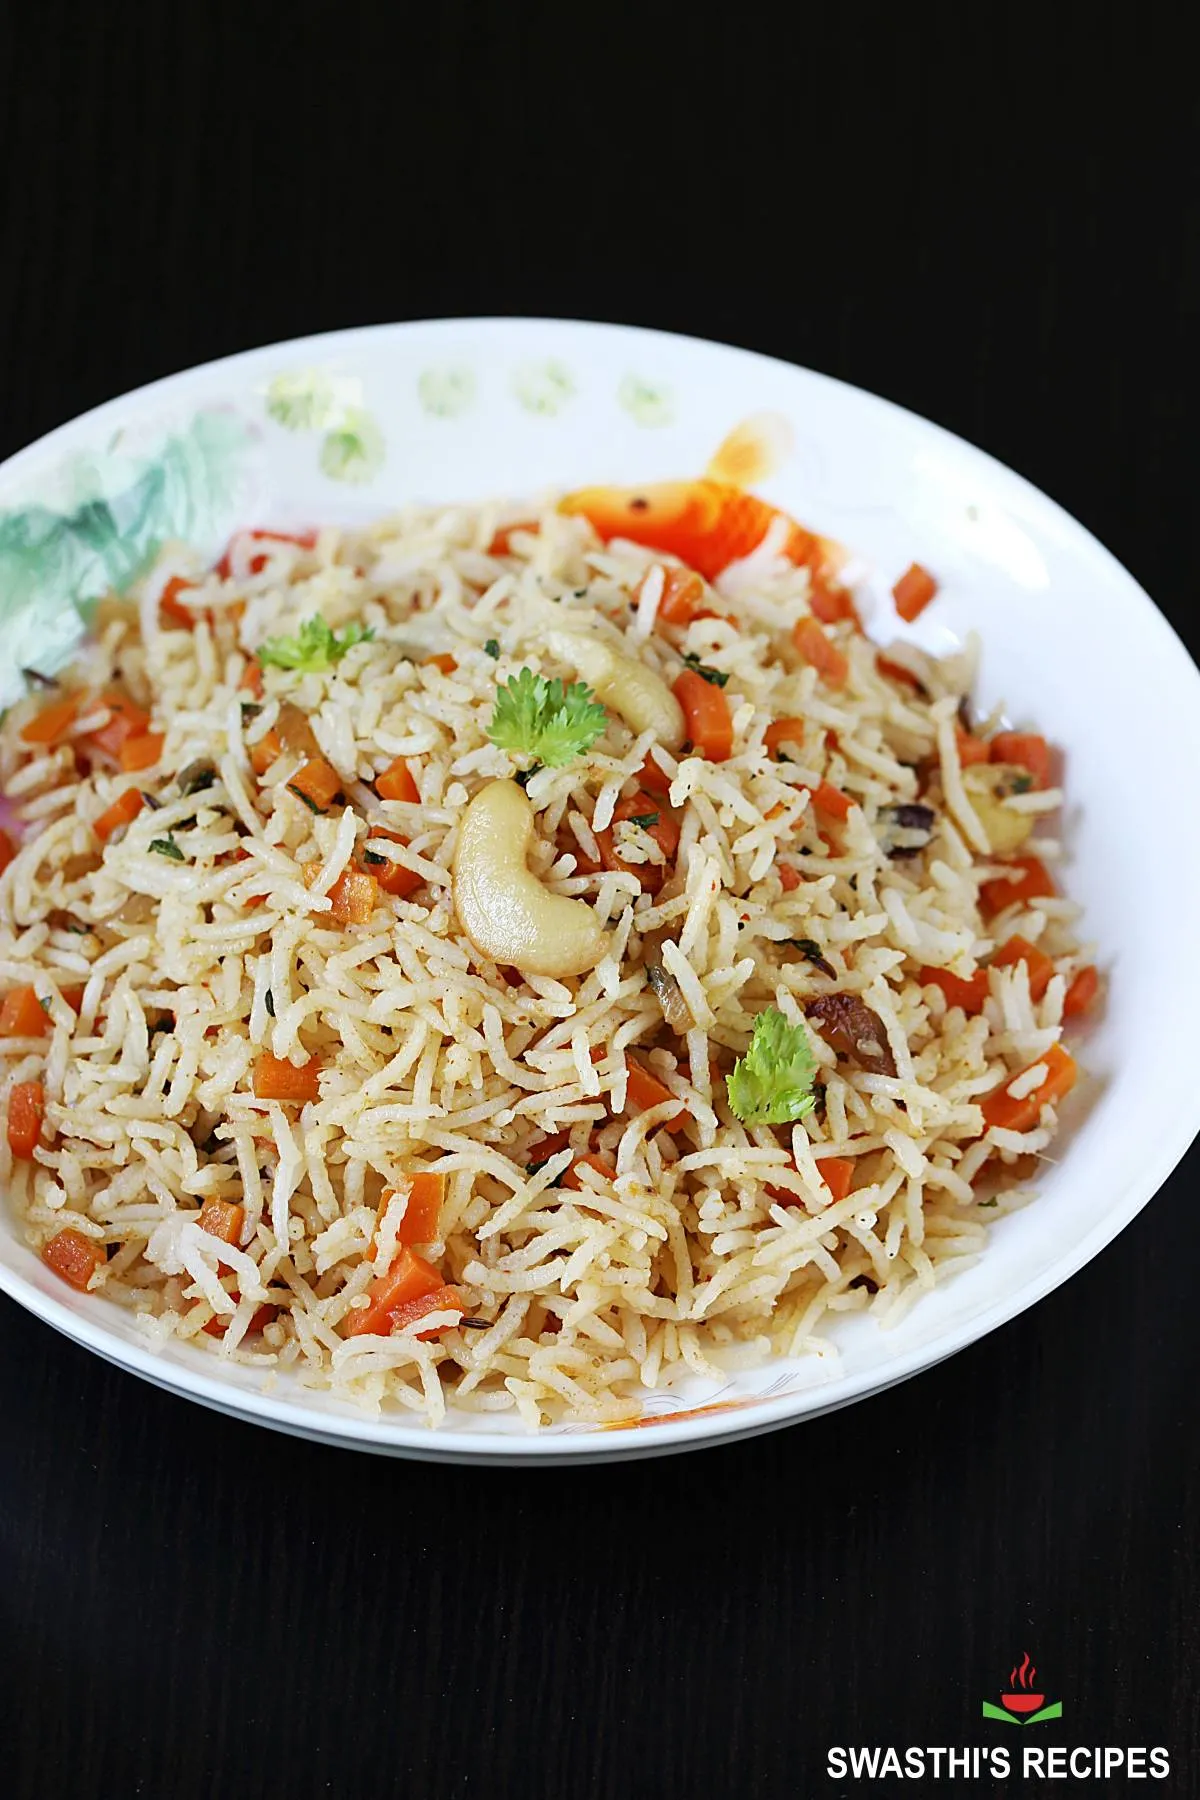 carrot rice recipe made with cooked rice, spices and fresh carrots